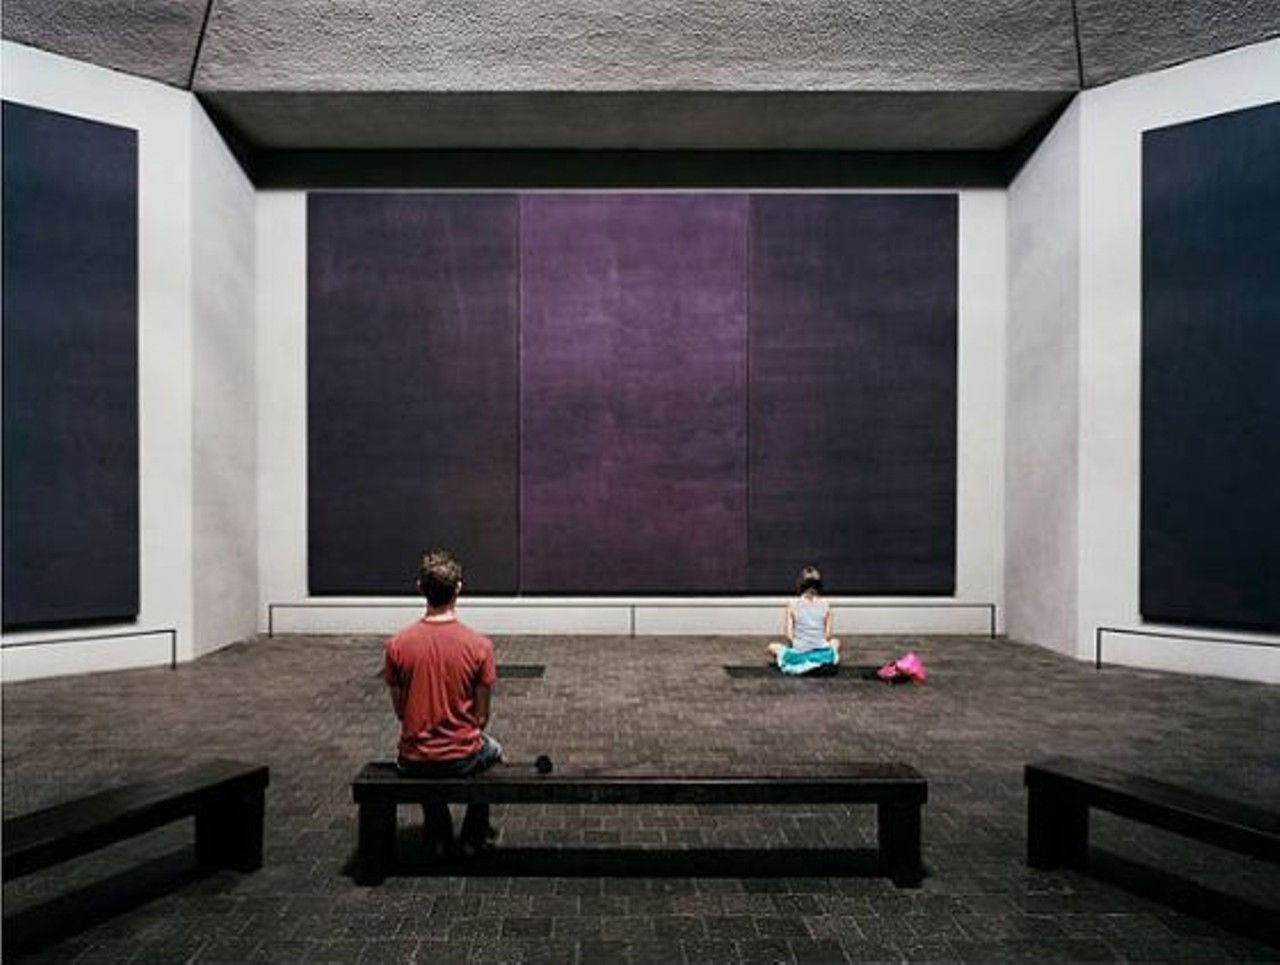 Isn't man always alone? Contemplate that, and other big questions, while trying to understand the power of Mark Rothko's art at the Rothko Chapel in Houston, Texas.